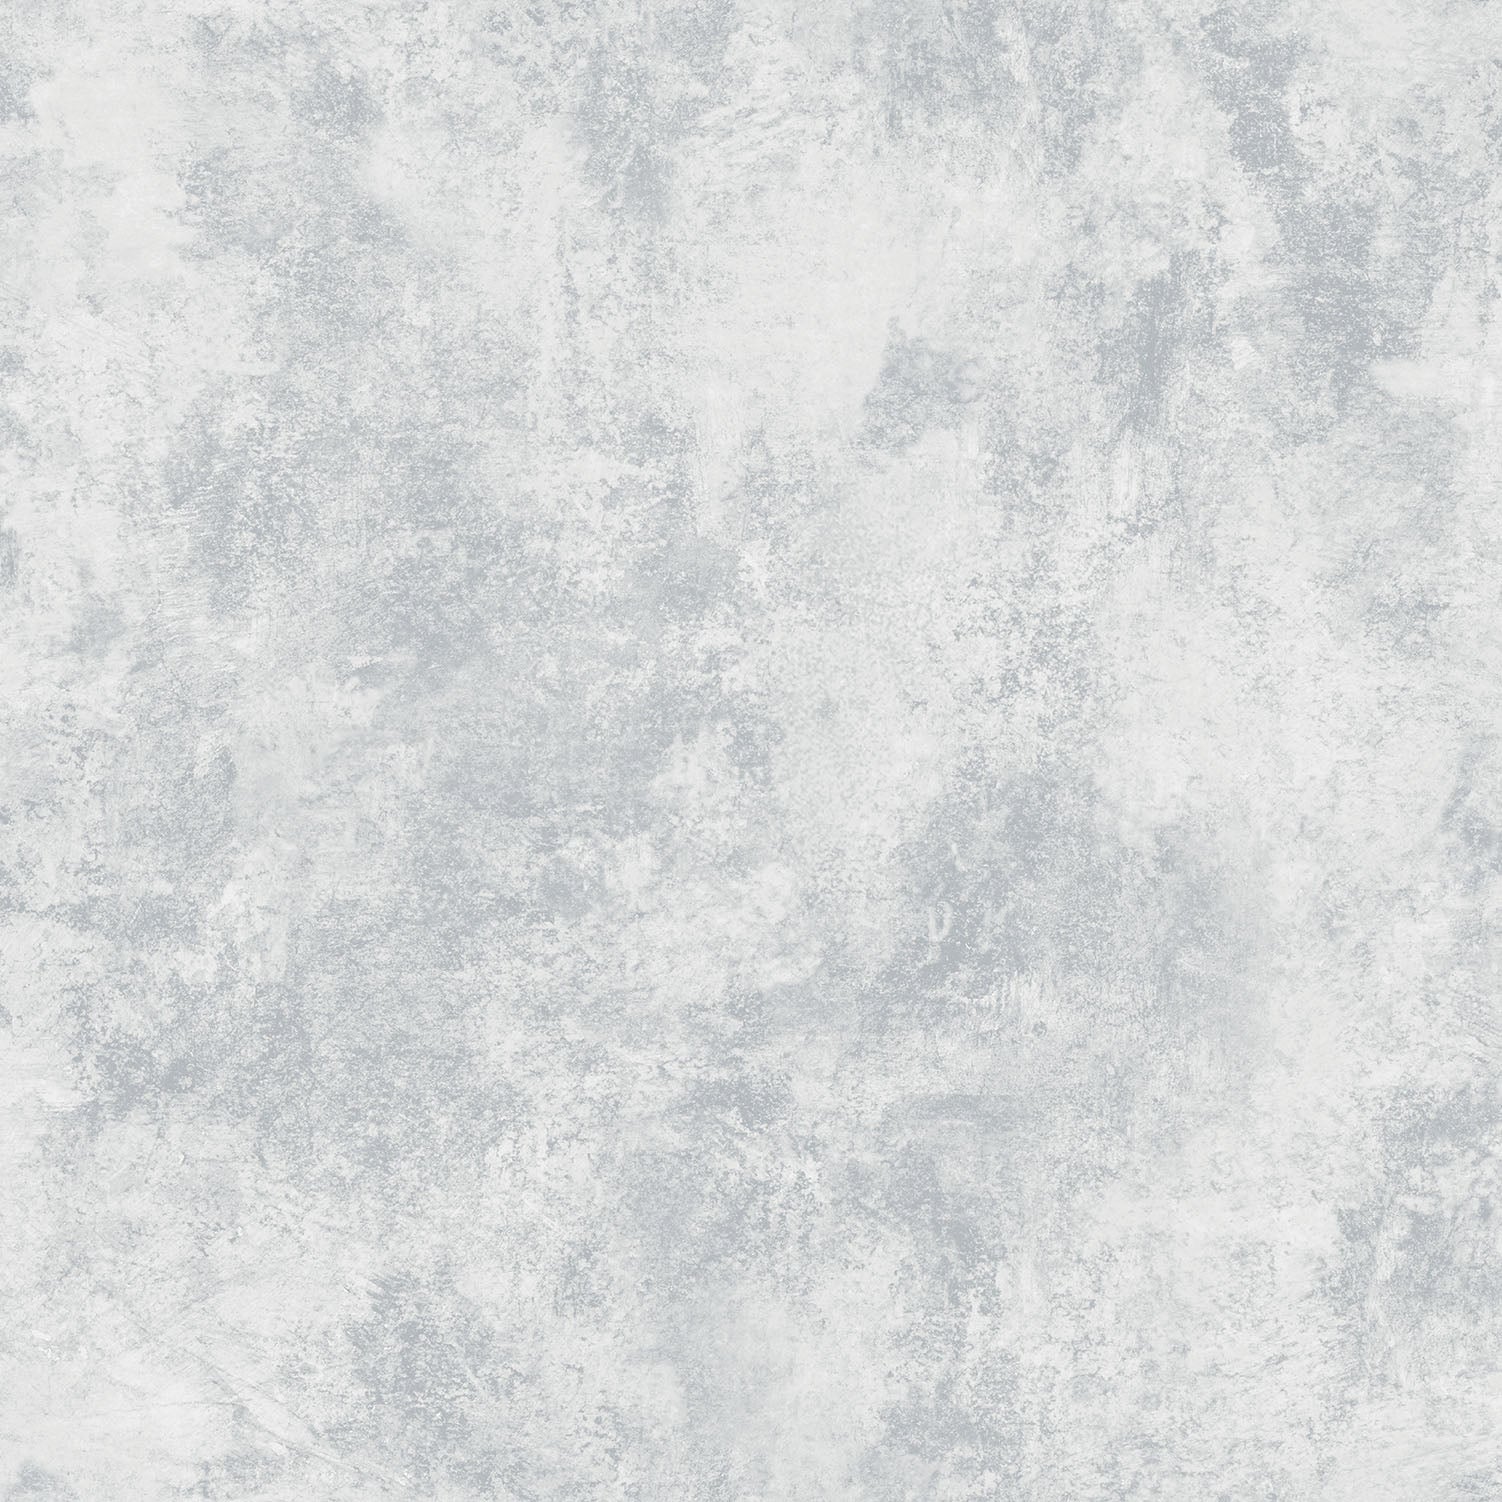 Shop Sample Gears Texture Silver/Grey Wallpaper from the Nostalgie ...